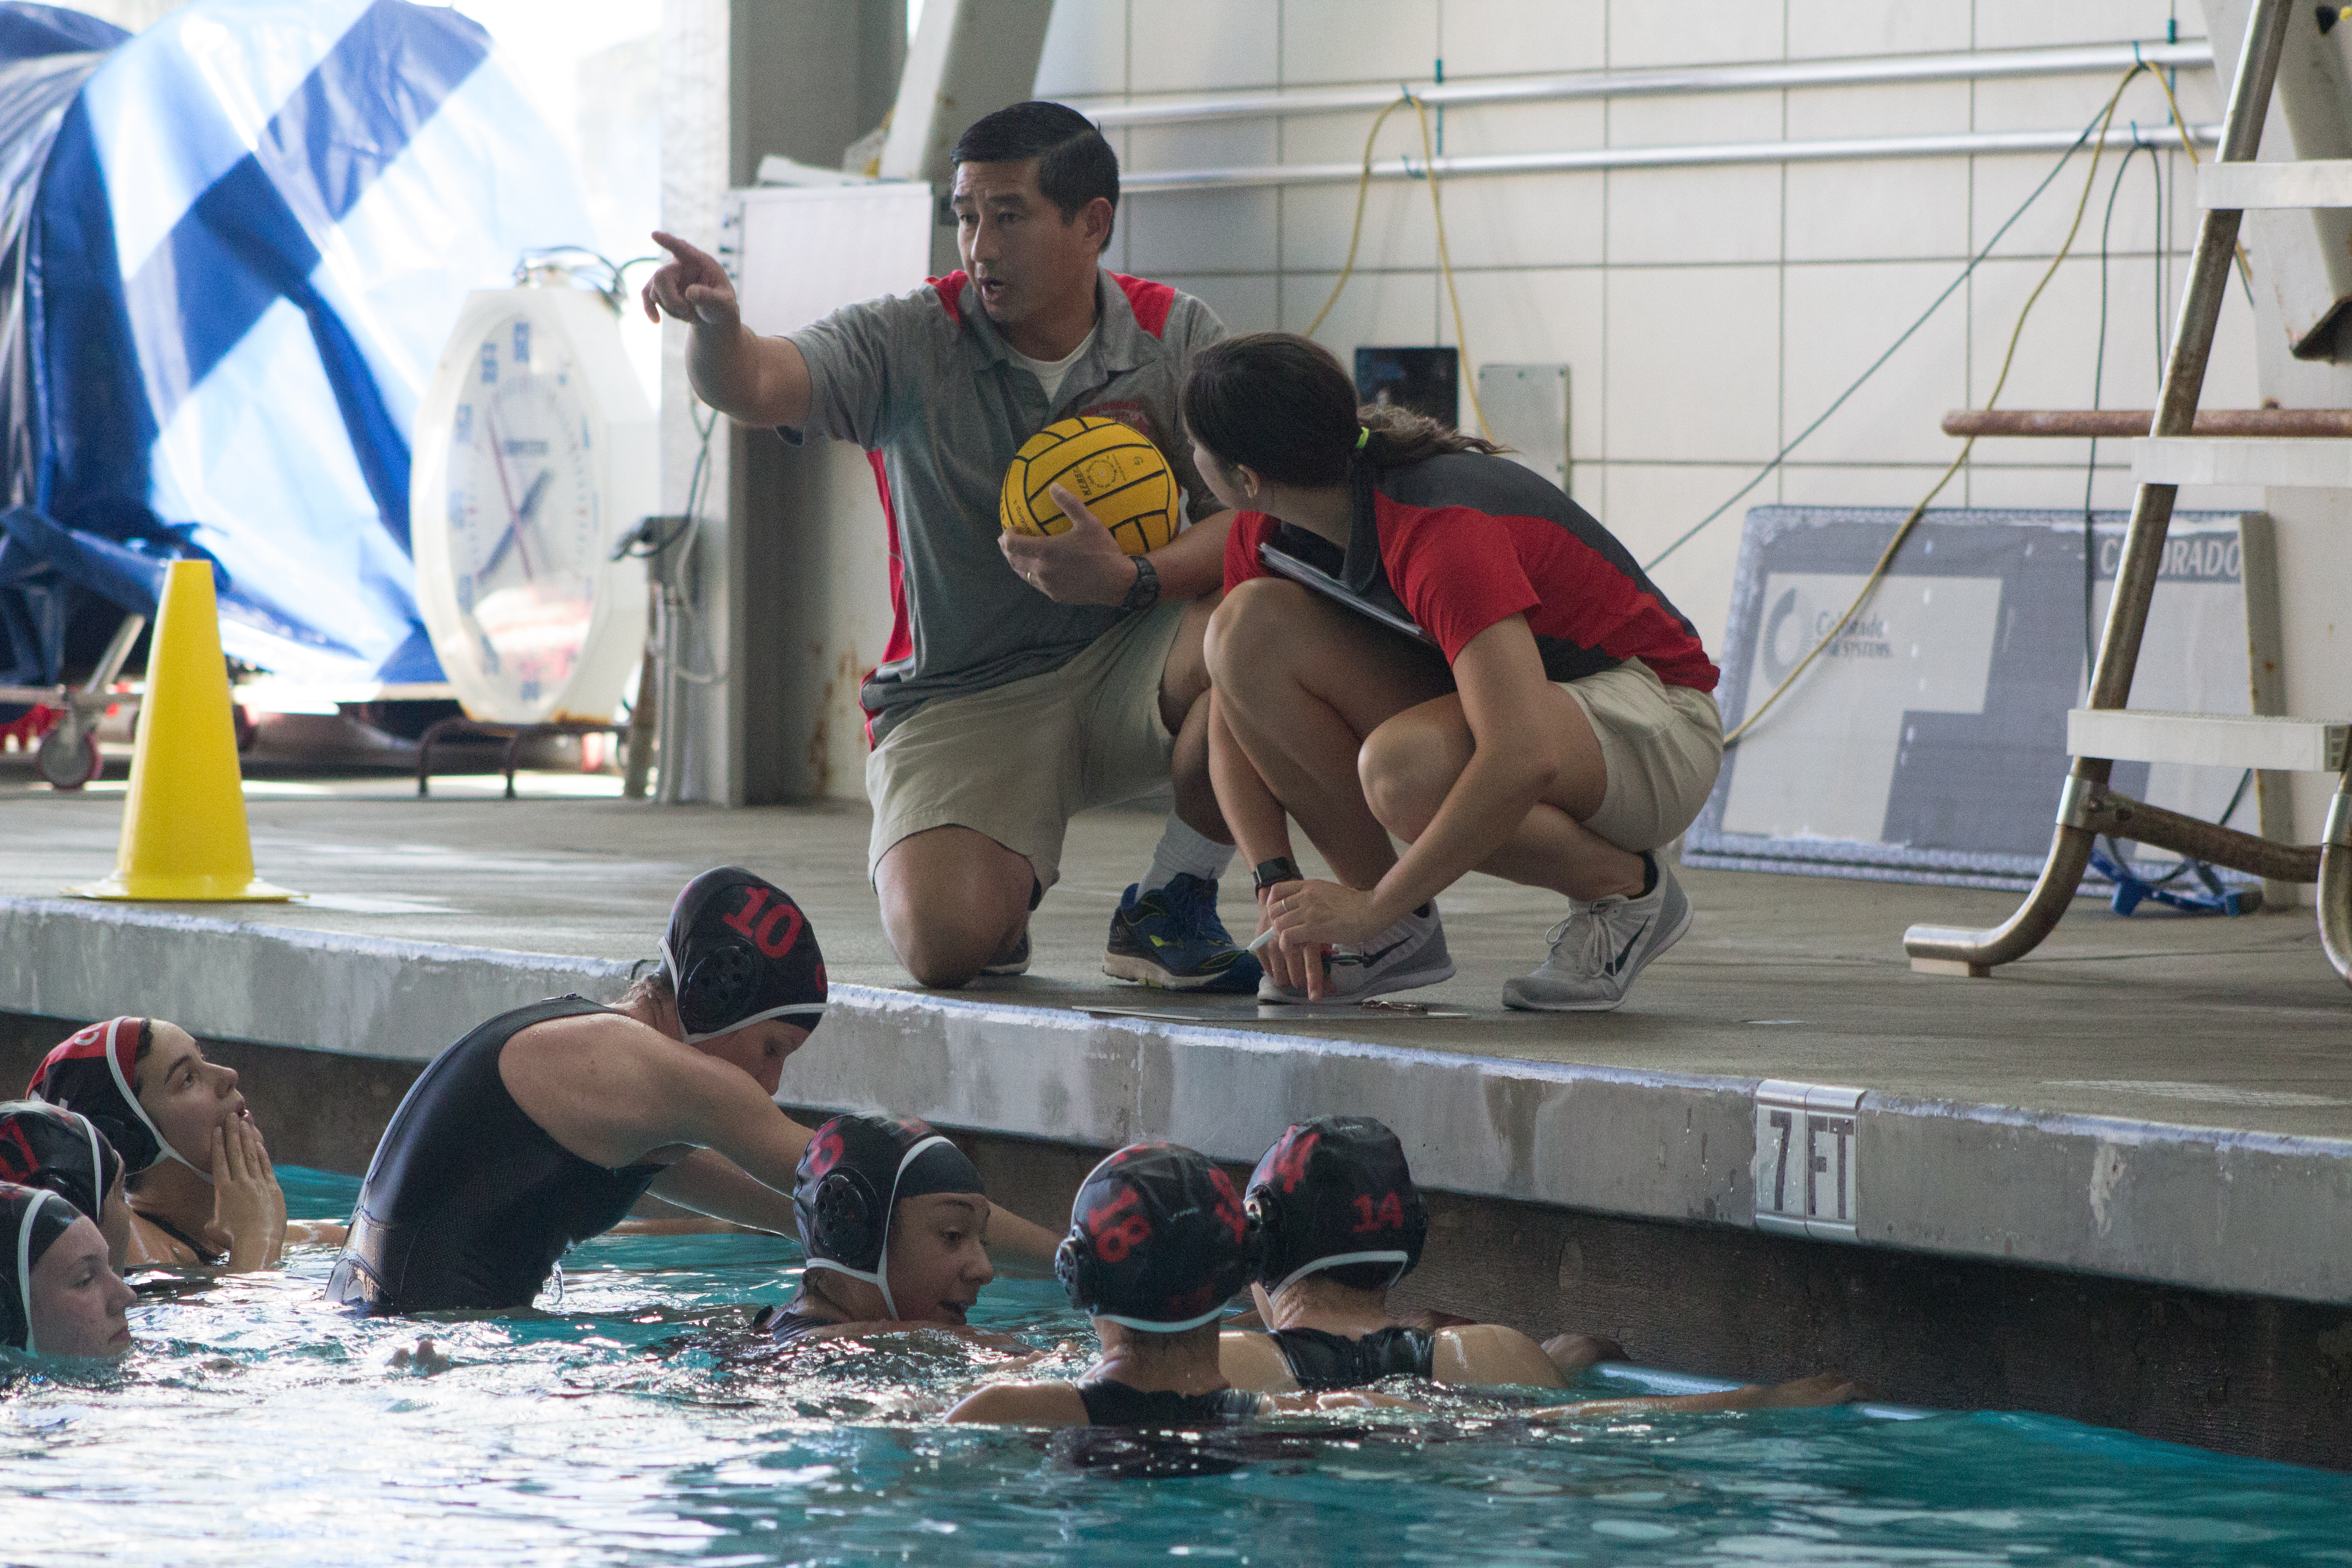 City College Rams Coach Pham and Assistant Coach Natalie Taylor talk with team after time out against DeAnza College on Oct. 5, 2015. Photo by Peter J. Suter/The Guardsman